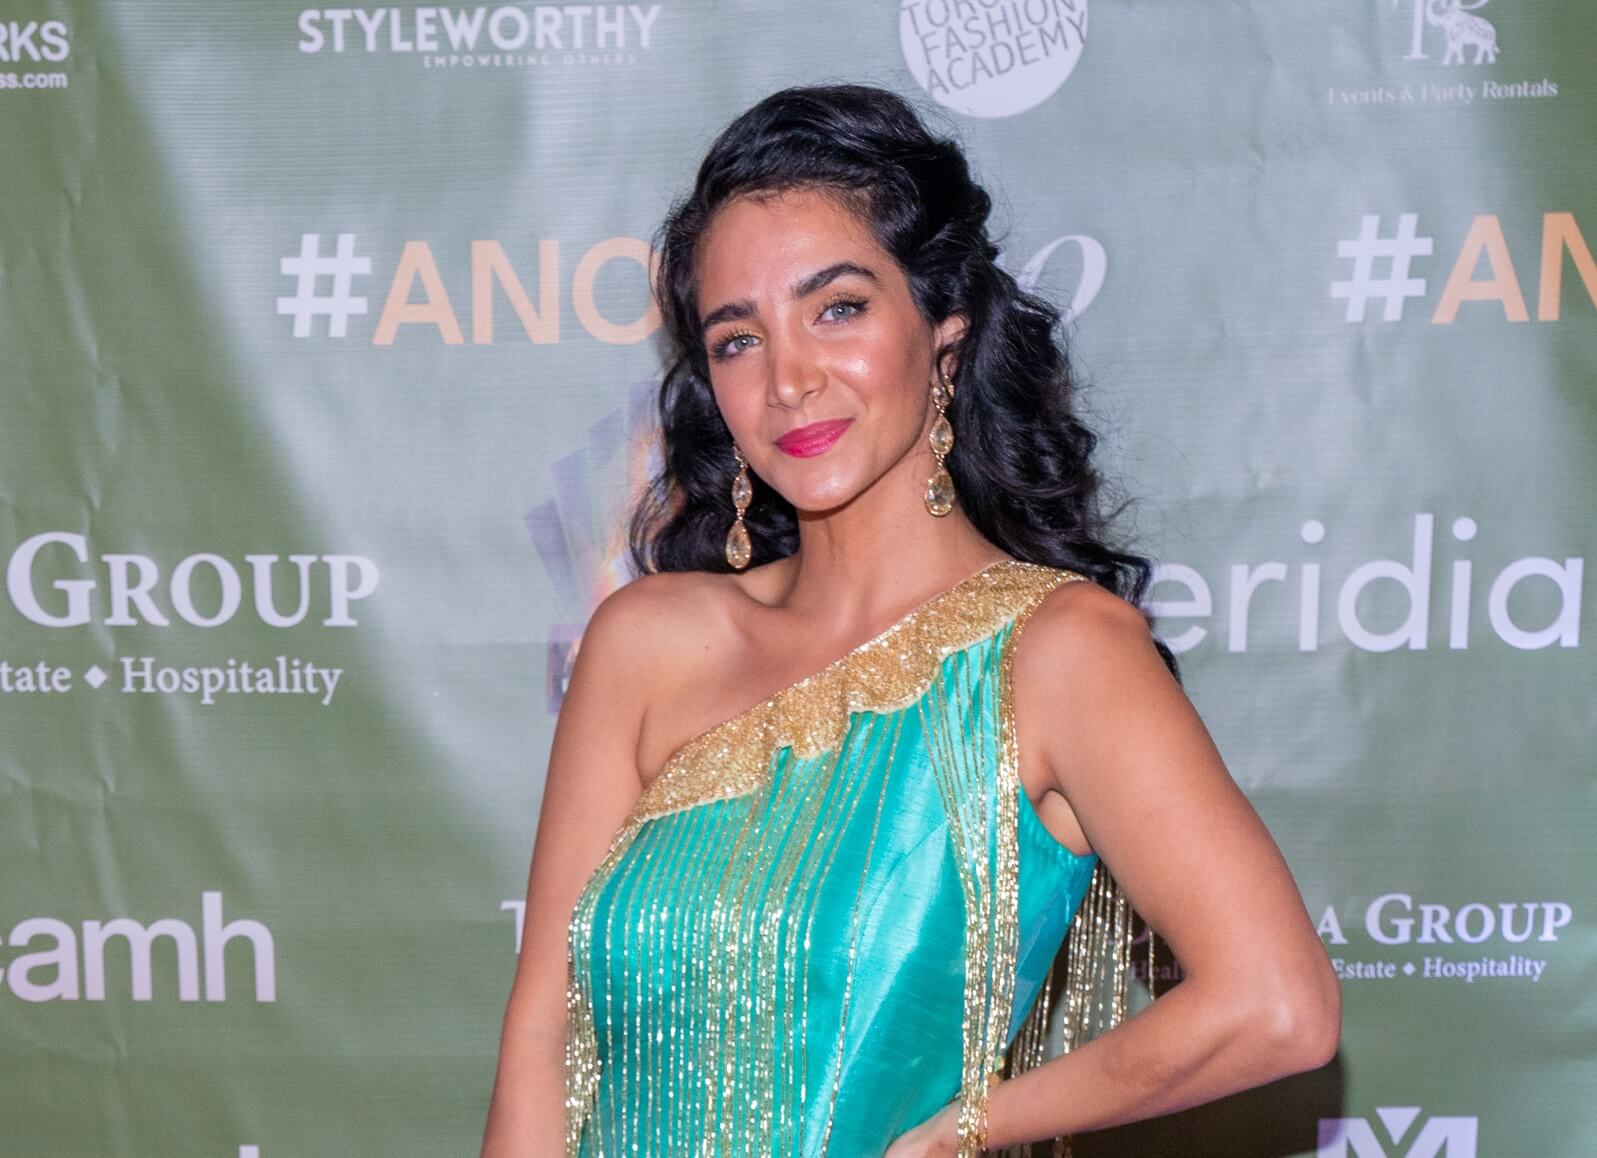 #ANOKHI20: Our Fave Beauty Looks From ANOKHI's 20th Anniversary ANOKHI Emerald Event Series: Thara Natalie at The ANOKHI EMERALD RUNWAY. Photo Credits listed below.